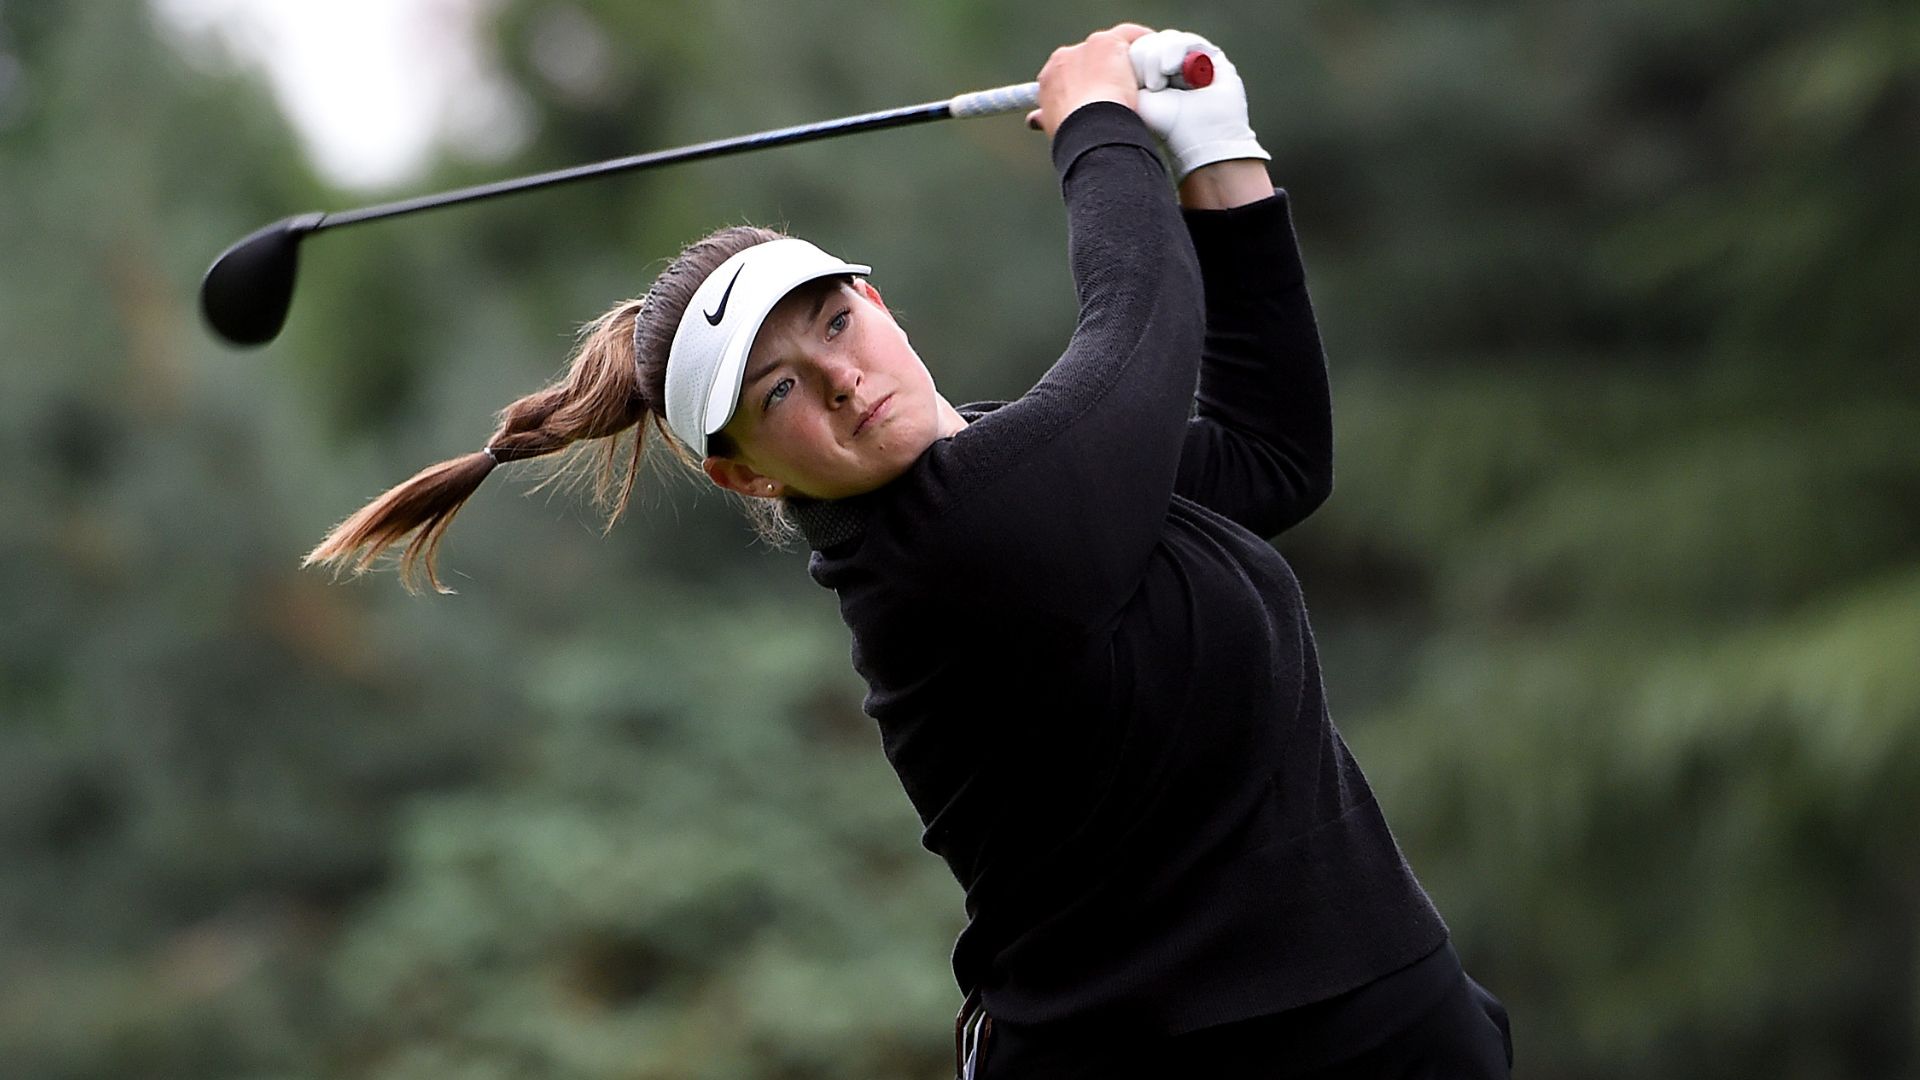 At her home course, Caroline Inglis makes ace, T-10 at LPGA’s AmazingCre Portland